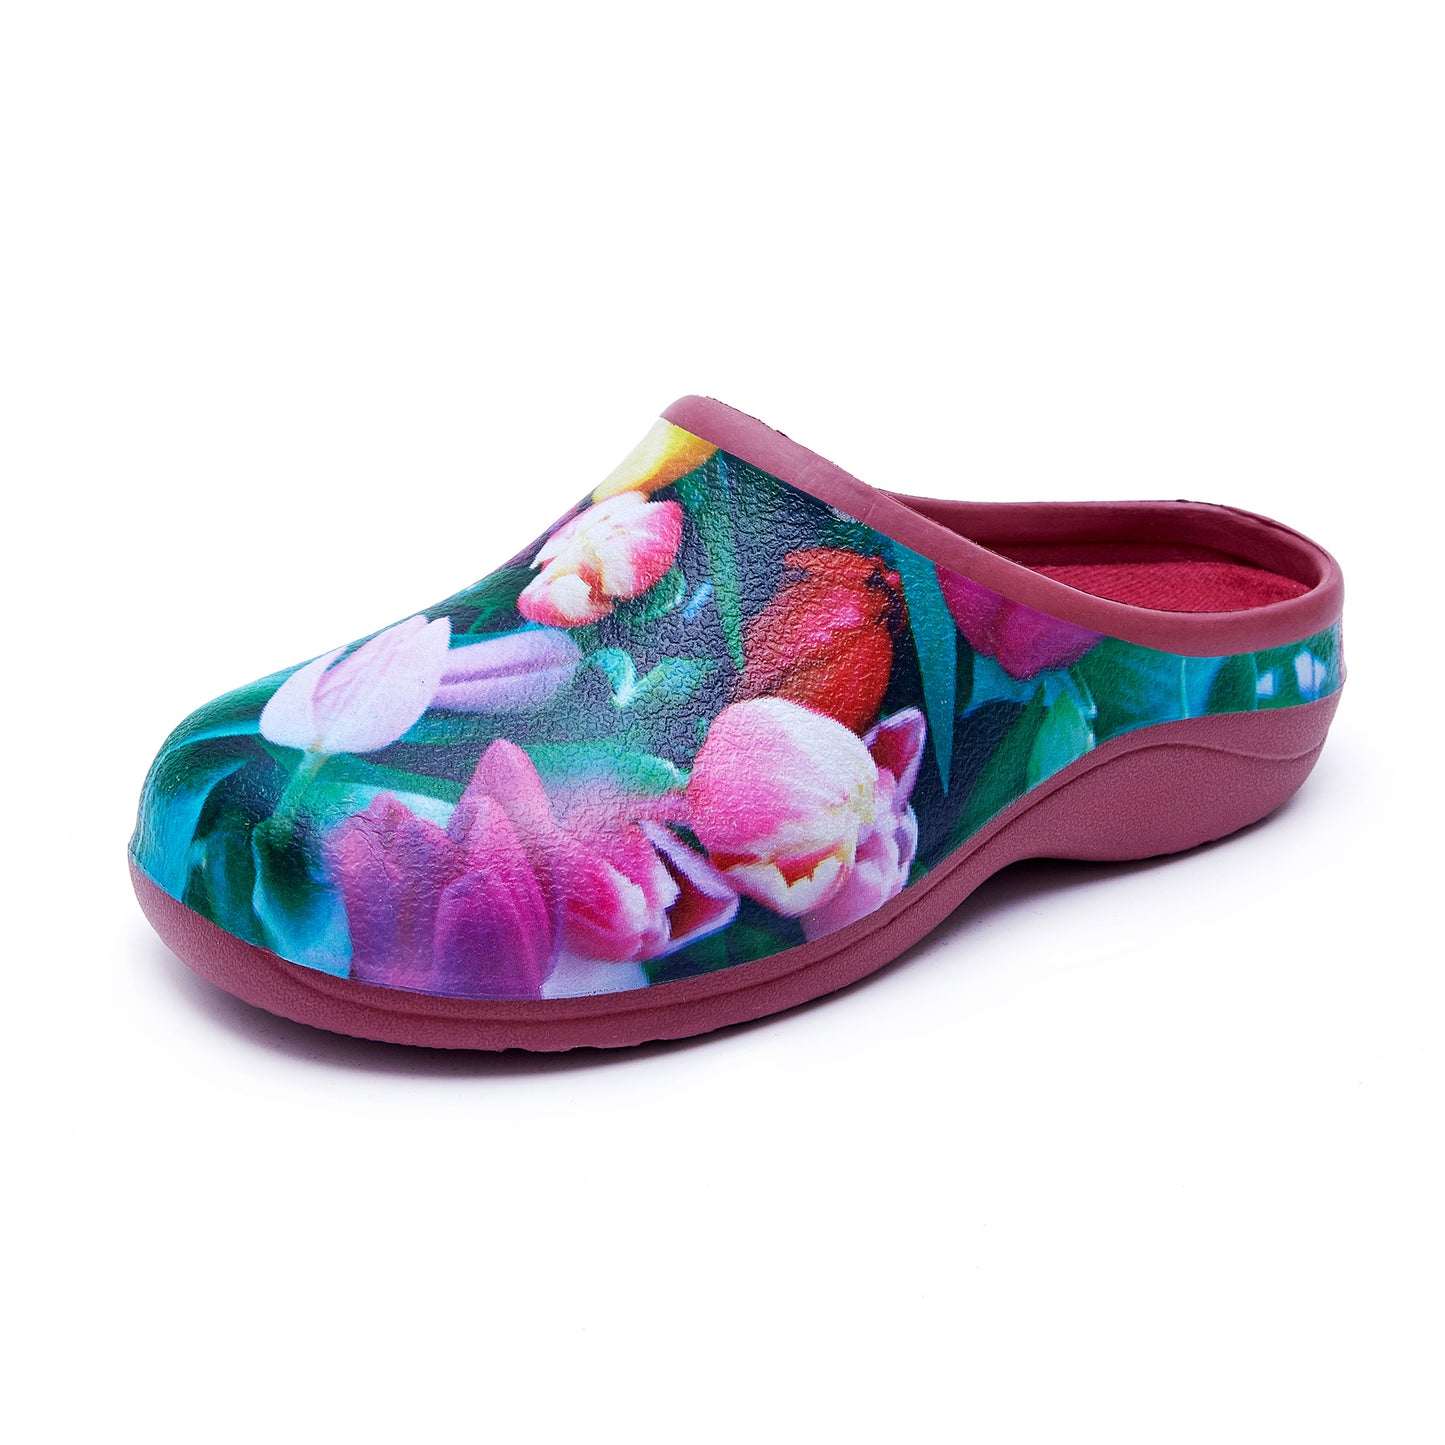 Tulip Red Sole Garden Clogs Backdoorshoes®